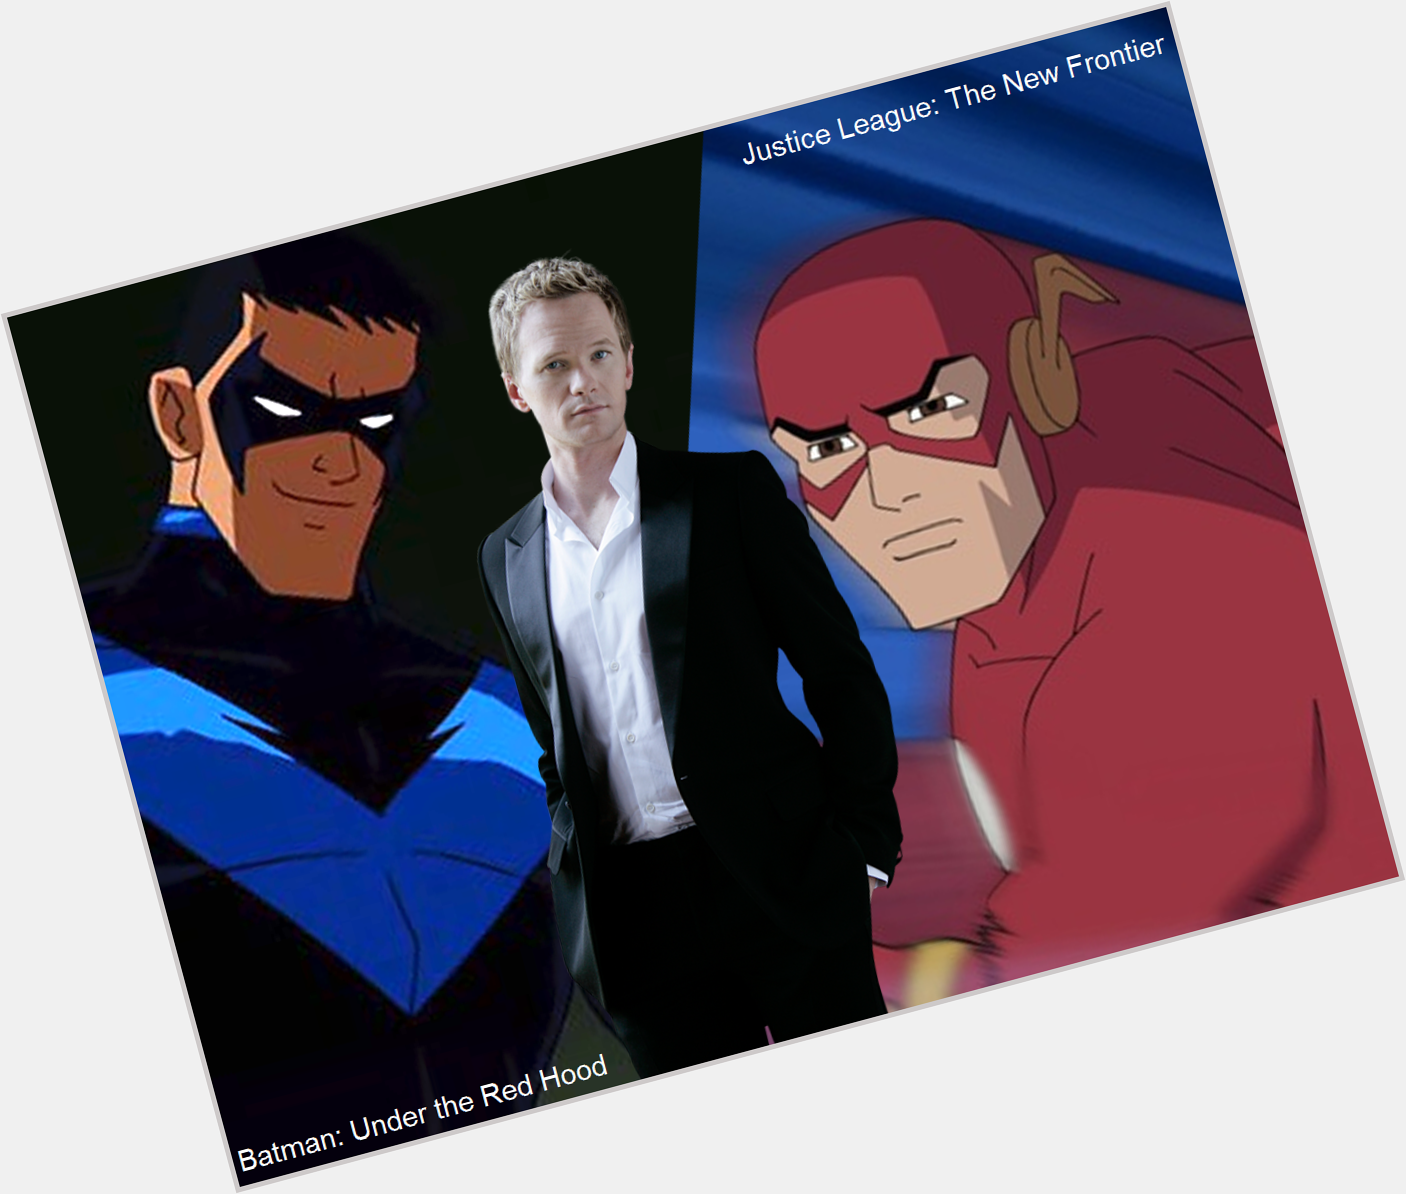 Happy Birthday to Neil Patrick Harris! He\s contributed voice work to the DCverse, including Nightwing and The Flash. 